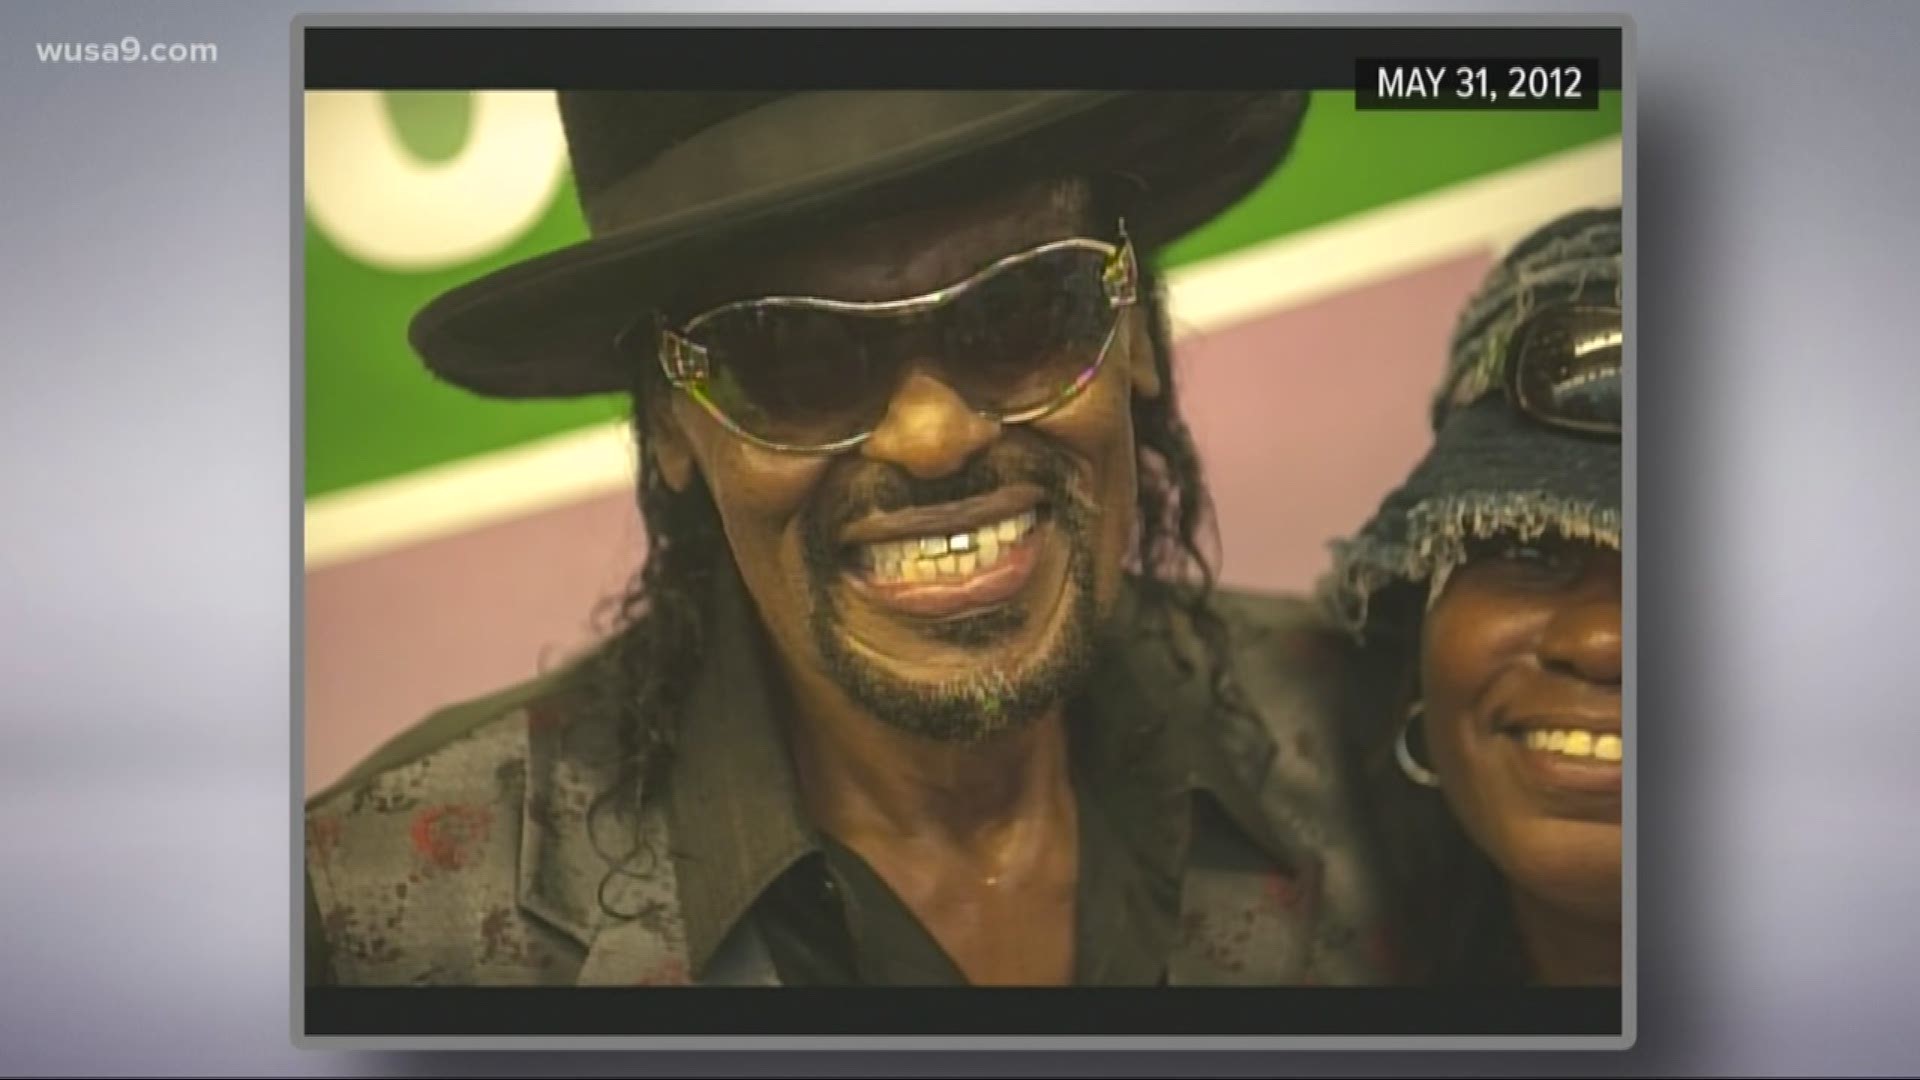 In 2012, thousands packed the Washington Convention Center to celebrate Chuck Brown's life.